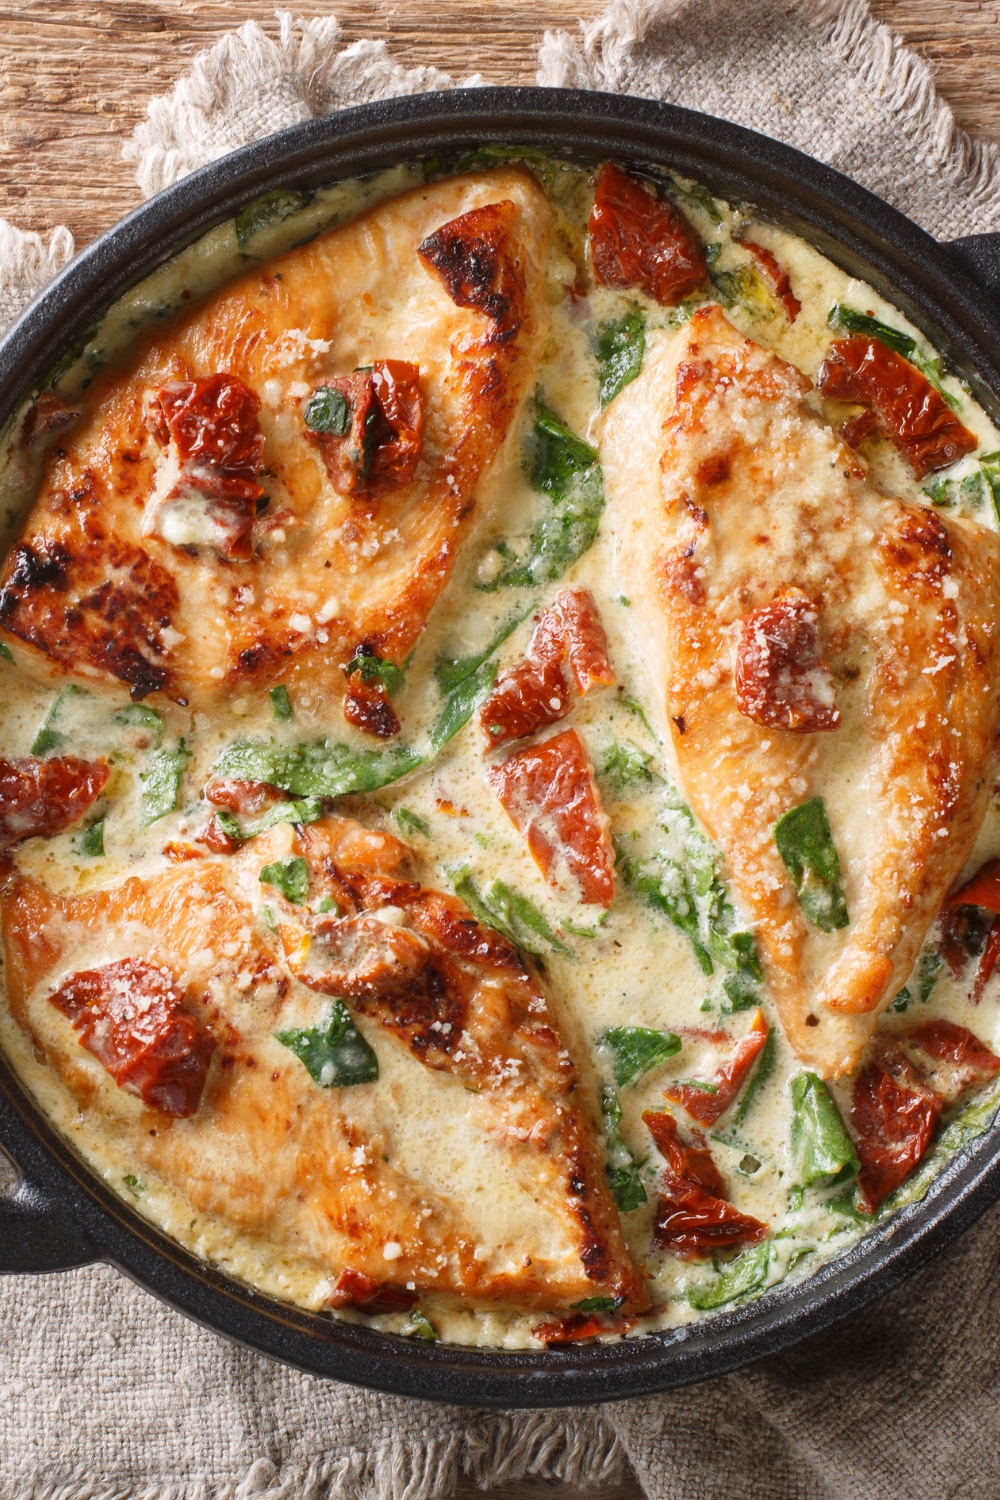 Baked Chicken with Sun-Dried Tomatoes, Spinach and Creamy Sauce